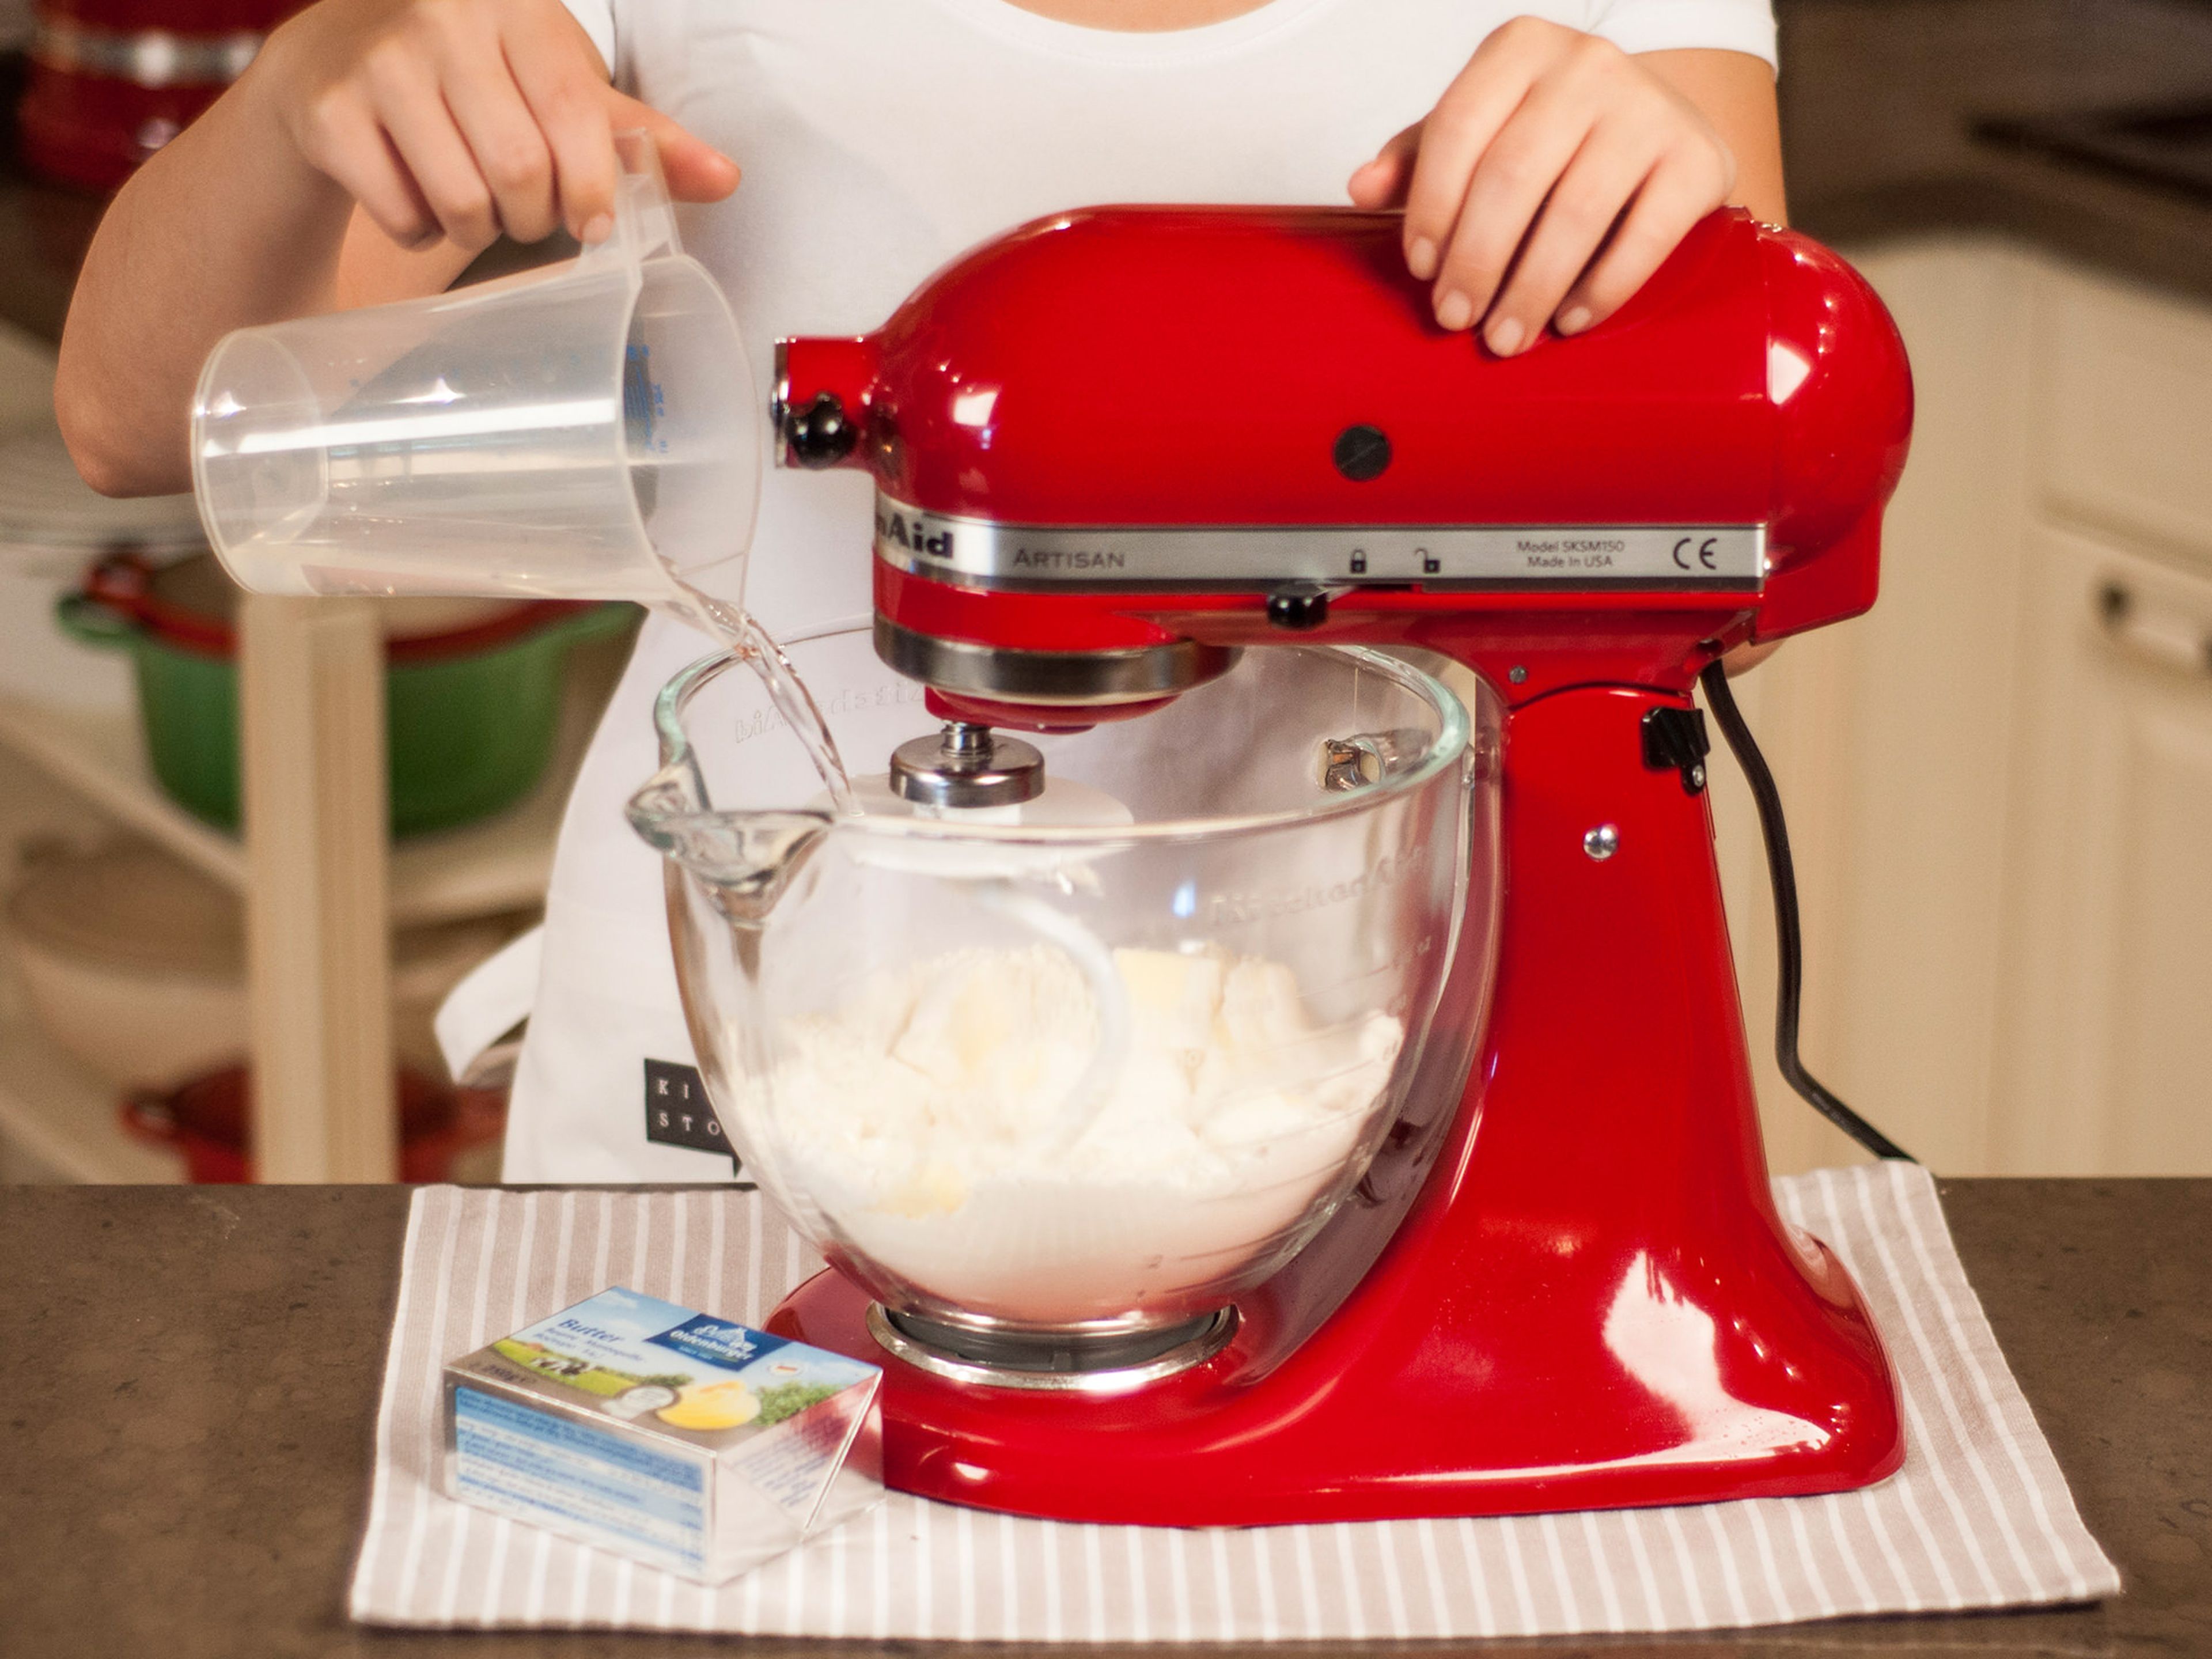 For the base, use a standing mixer or a hand mixer with dough hooks to mix flour, cold butter, and some of the salt. Beat in cold water. Then knead dough by hand until smooth.